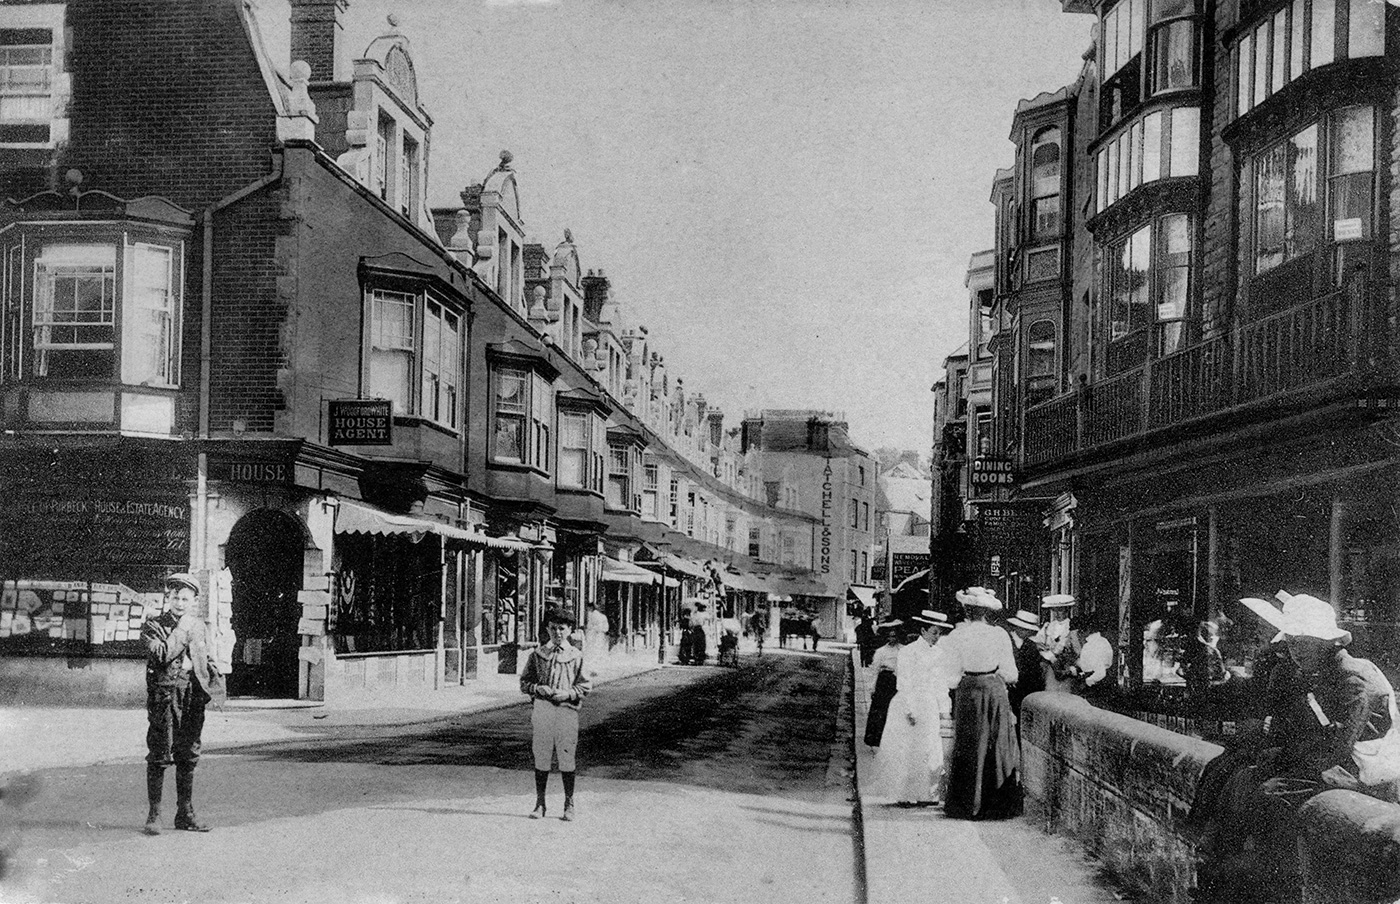 Institute Road in the late 1800s or early 1900s